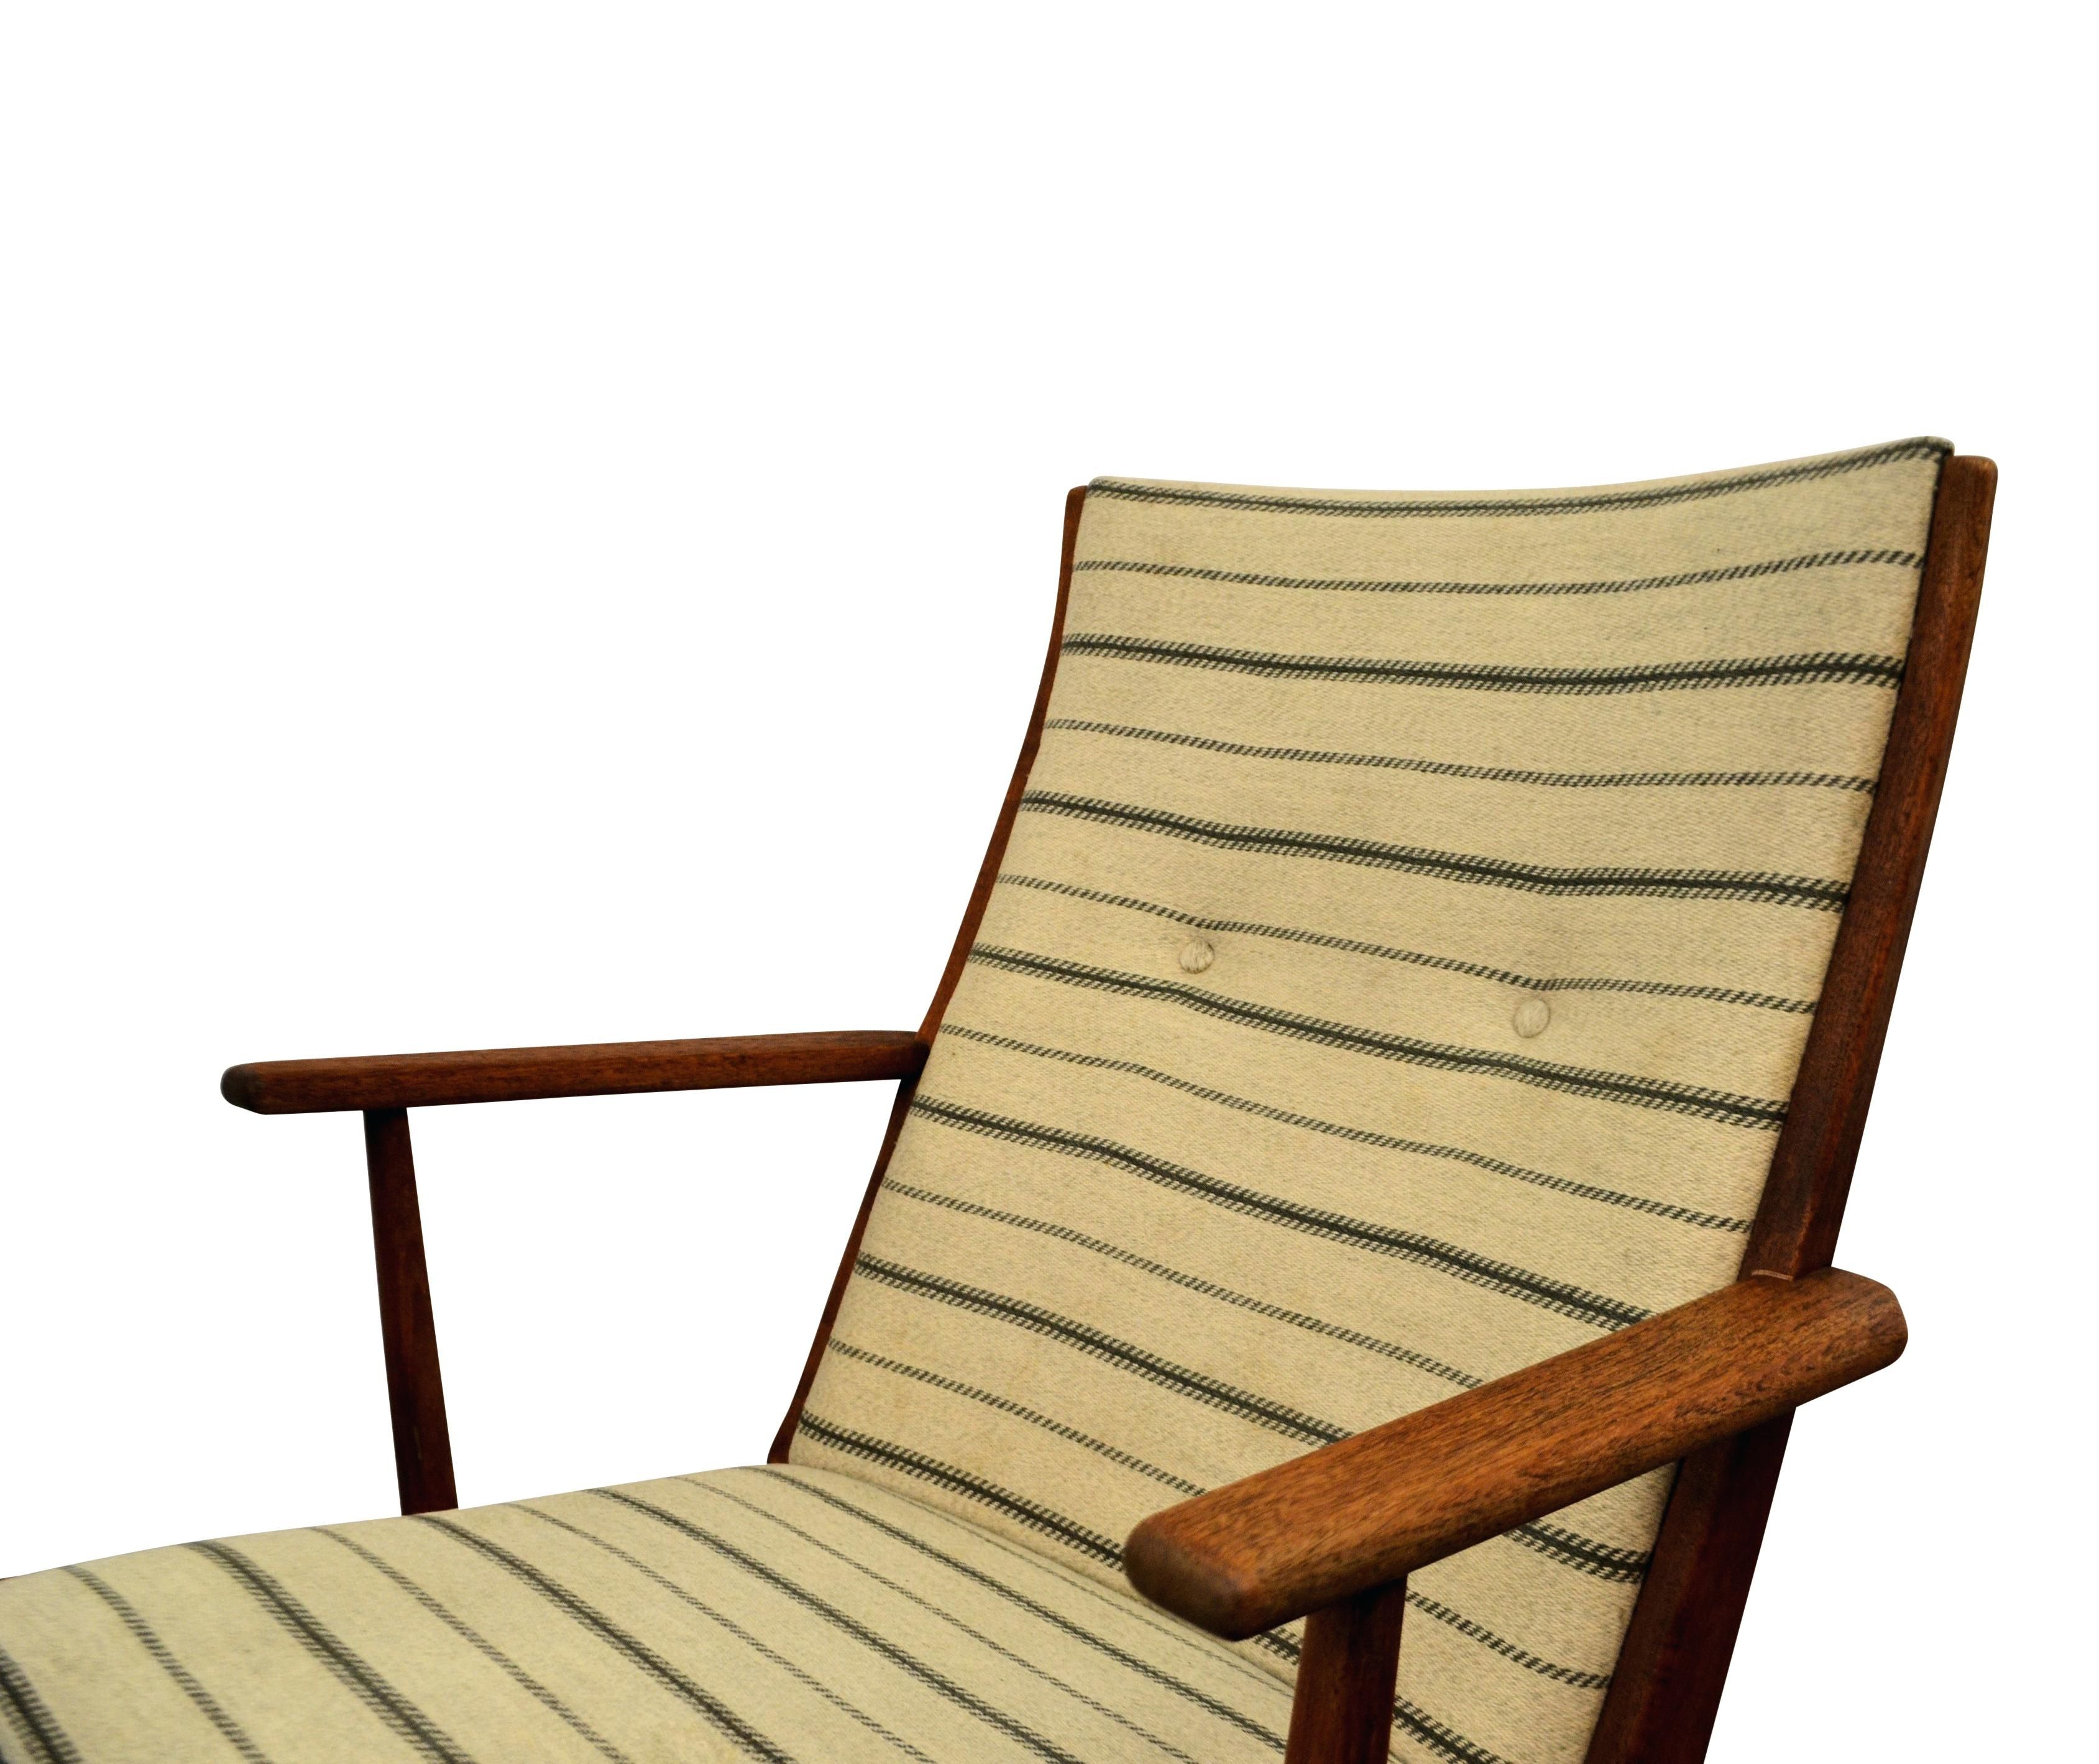 Teak Rocking Chair Chairs Sams Club Comexchange Info Outdoor Indoor Within Rocking Chairs At Sams Club (View 8 of 15)